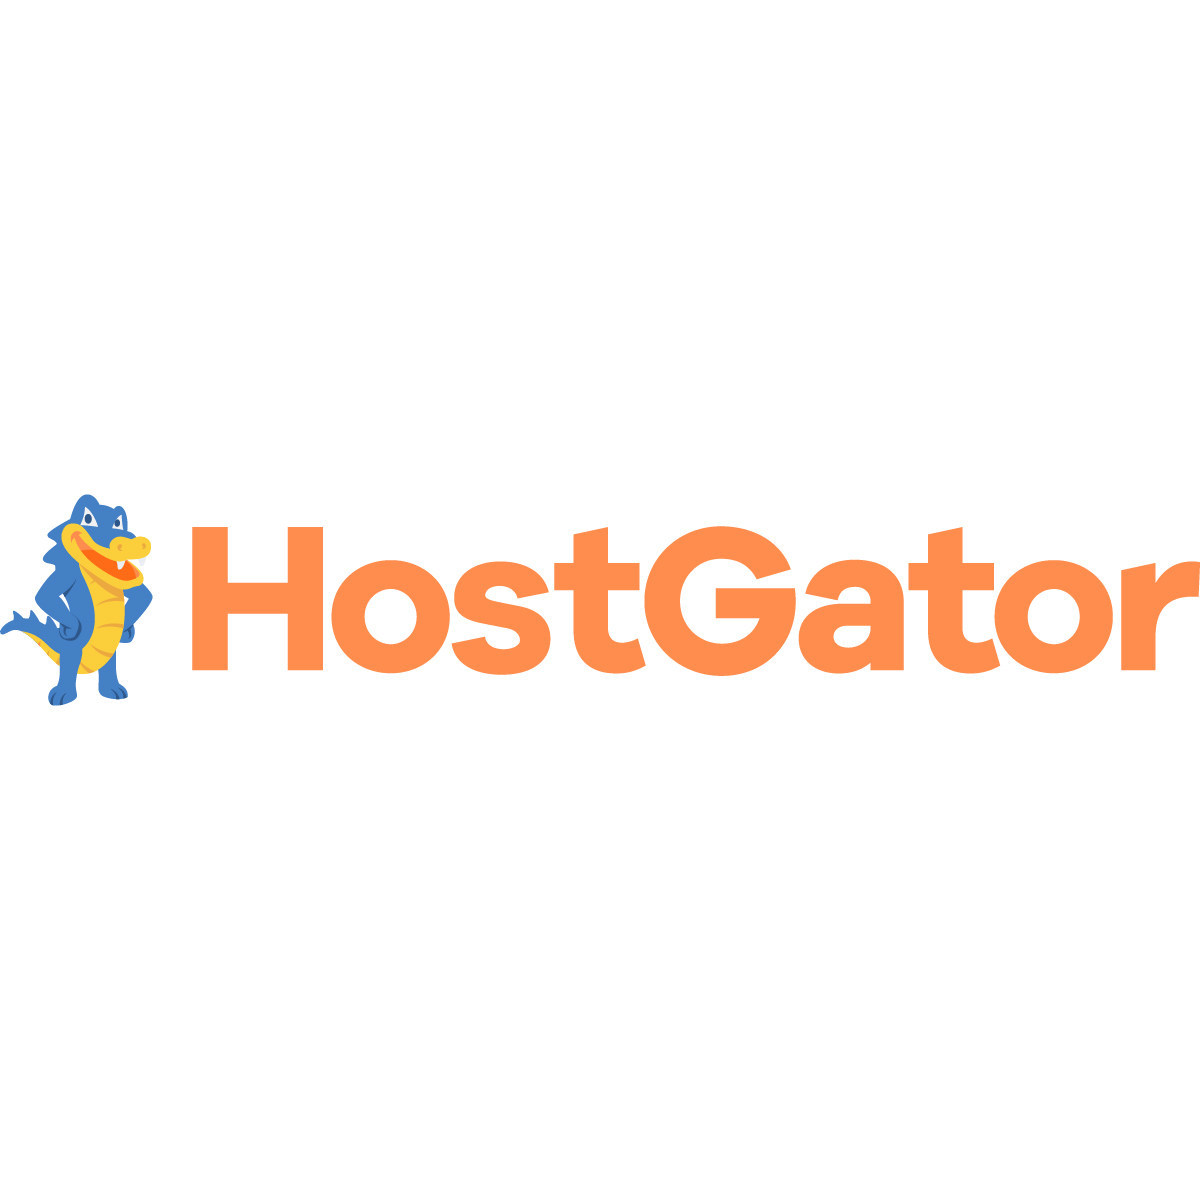 HostGator India Announces Black Friday Discounts on Domains, Web Hosting  and More